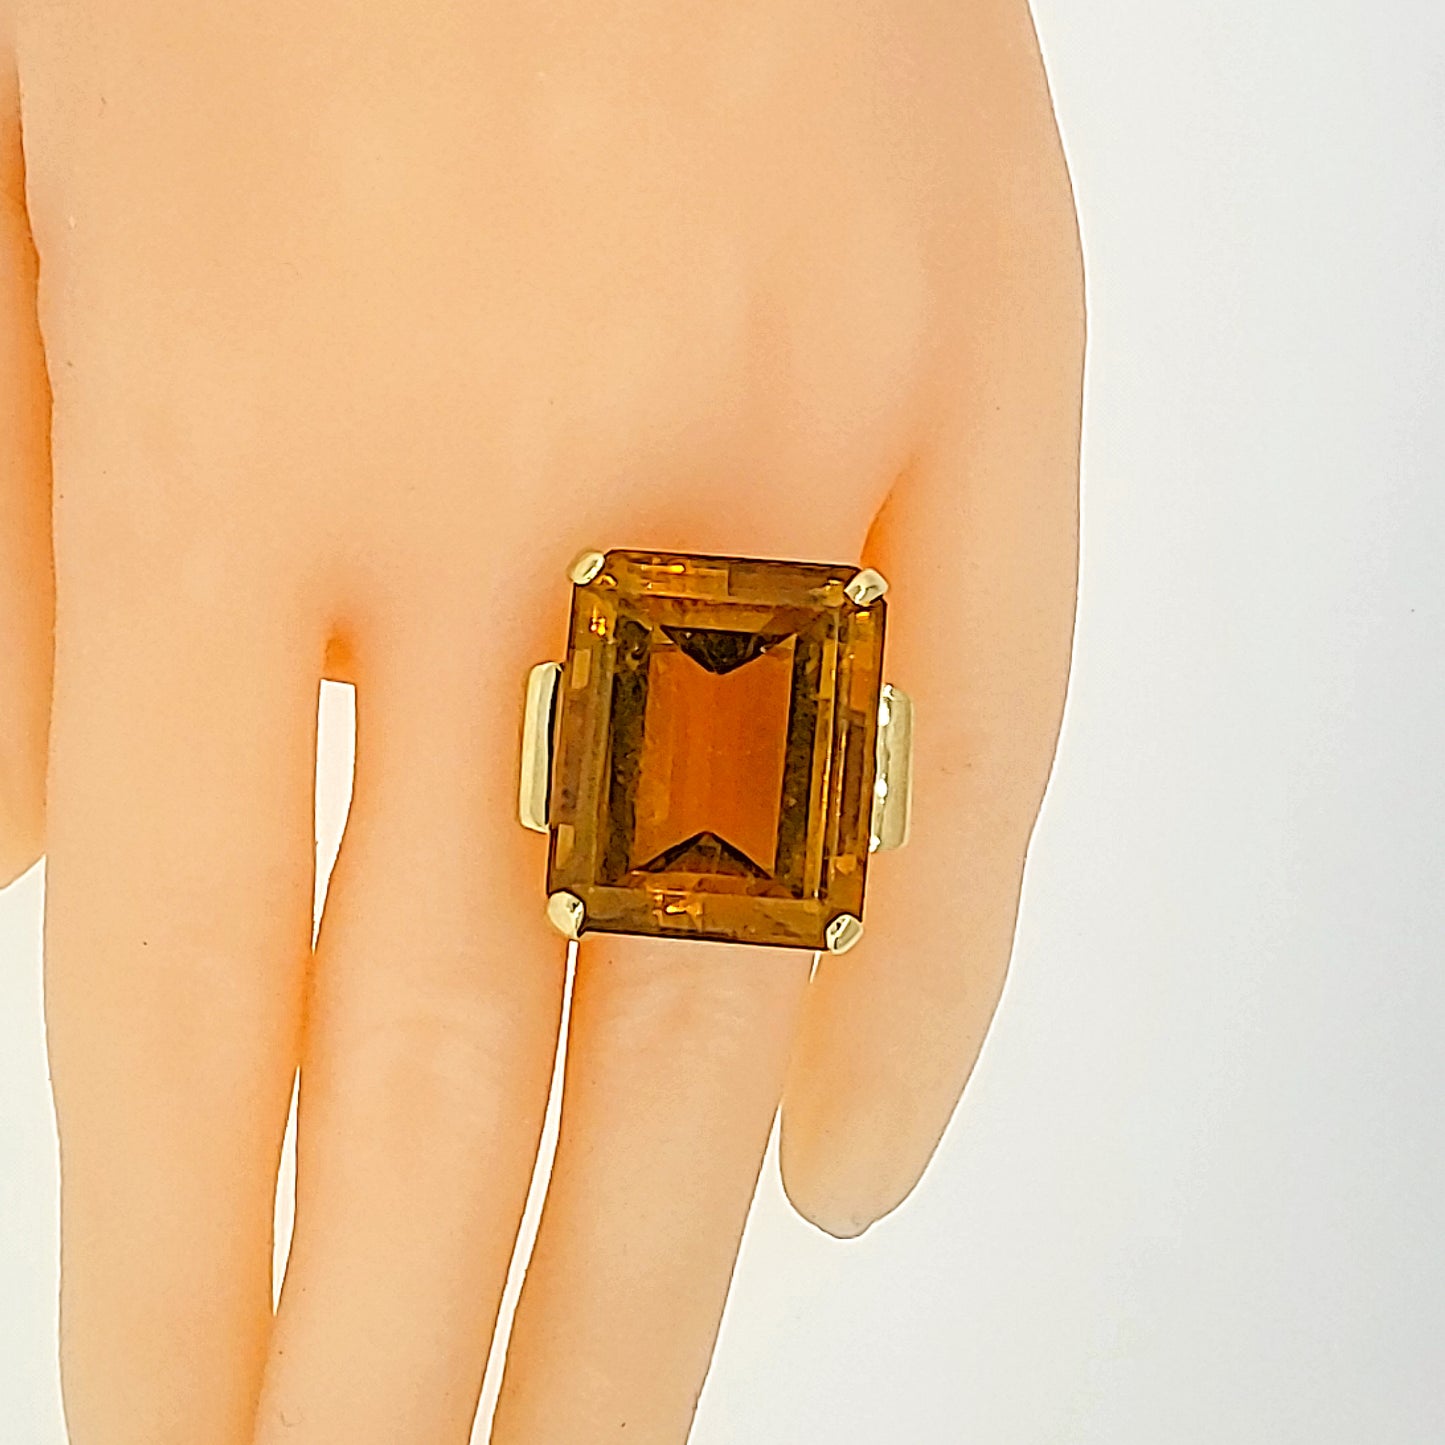 Load image into Gallery viewer, Fabulous Retro Citrine Yellow Gold Ring
